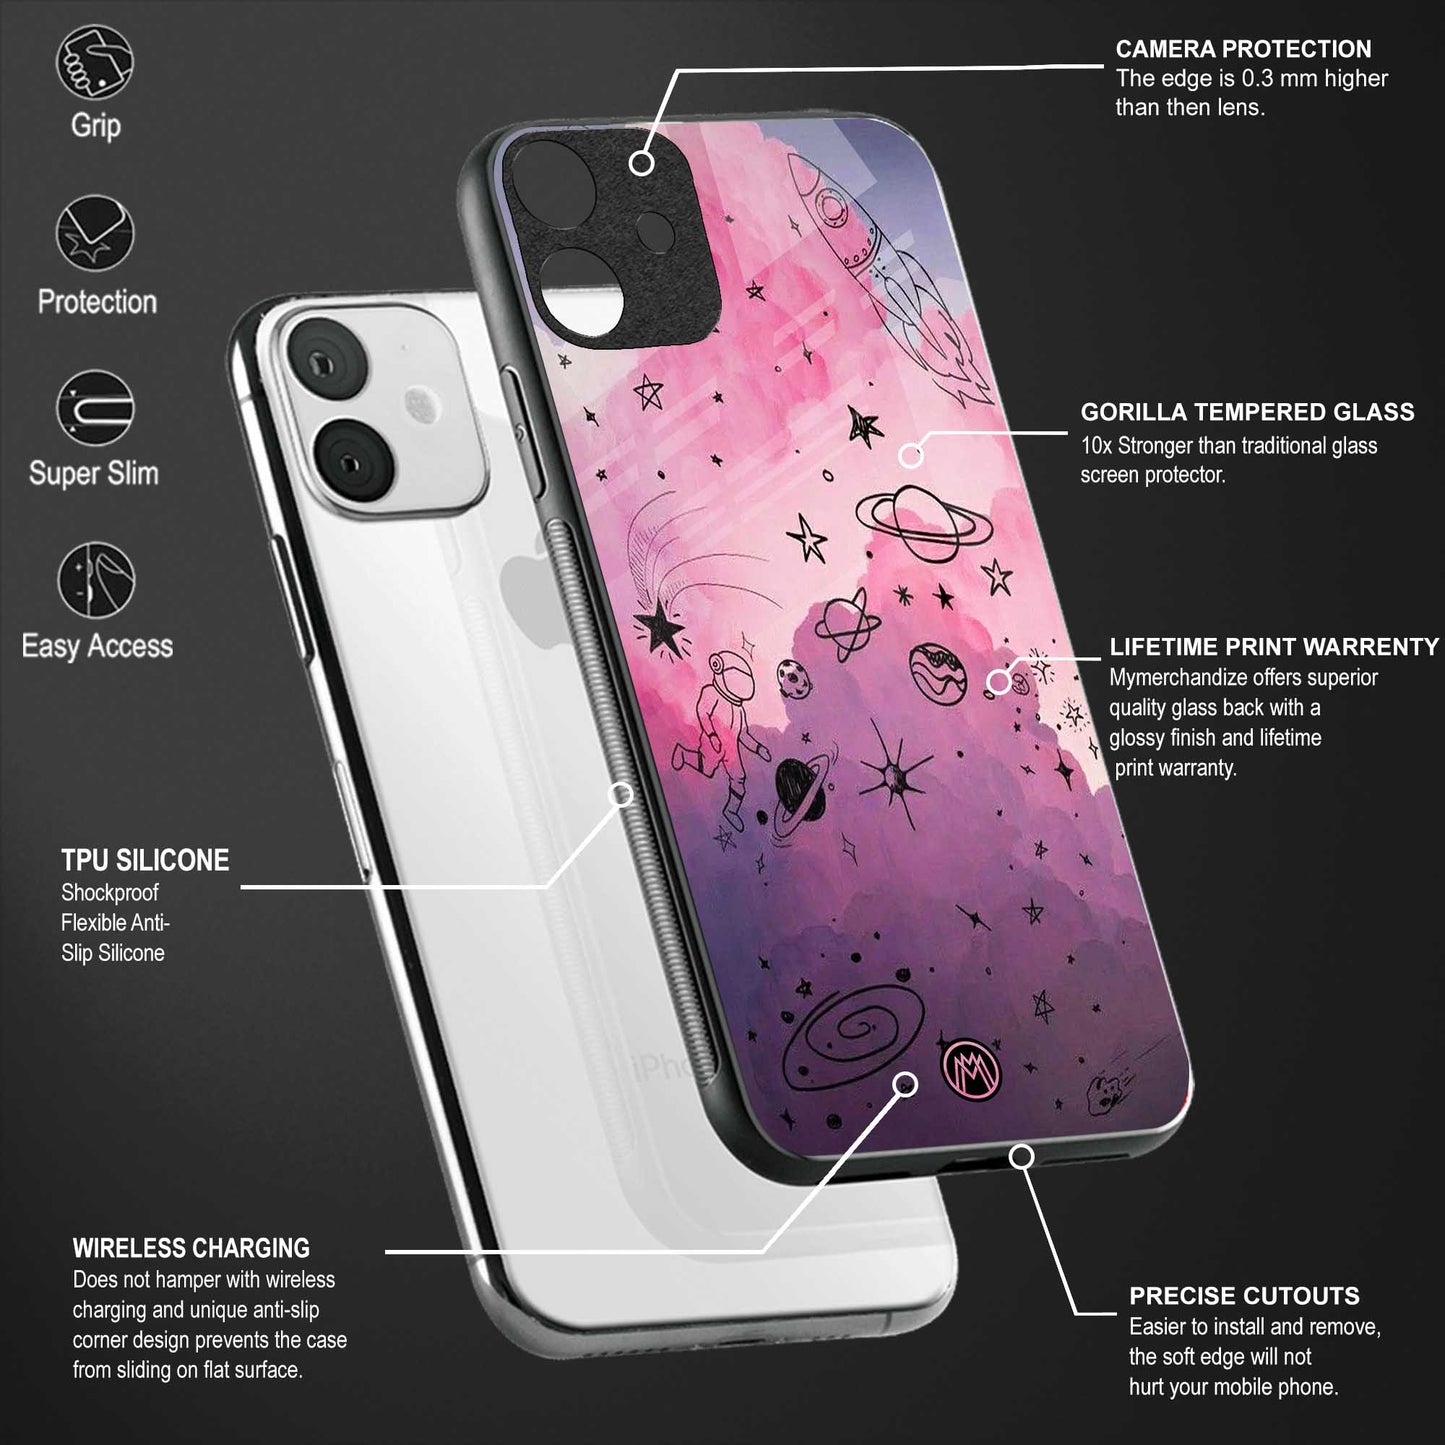 space pink aesthetic back phone cover | glass case for vivo y73